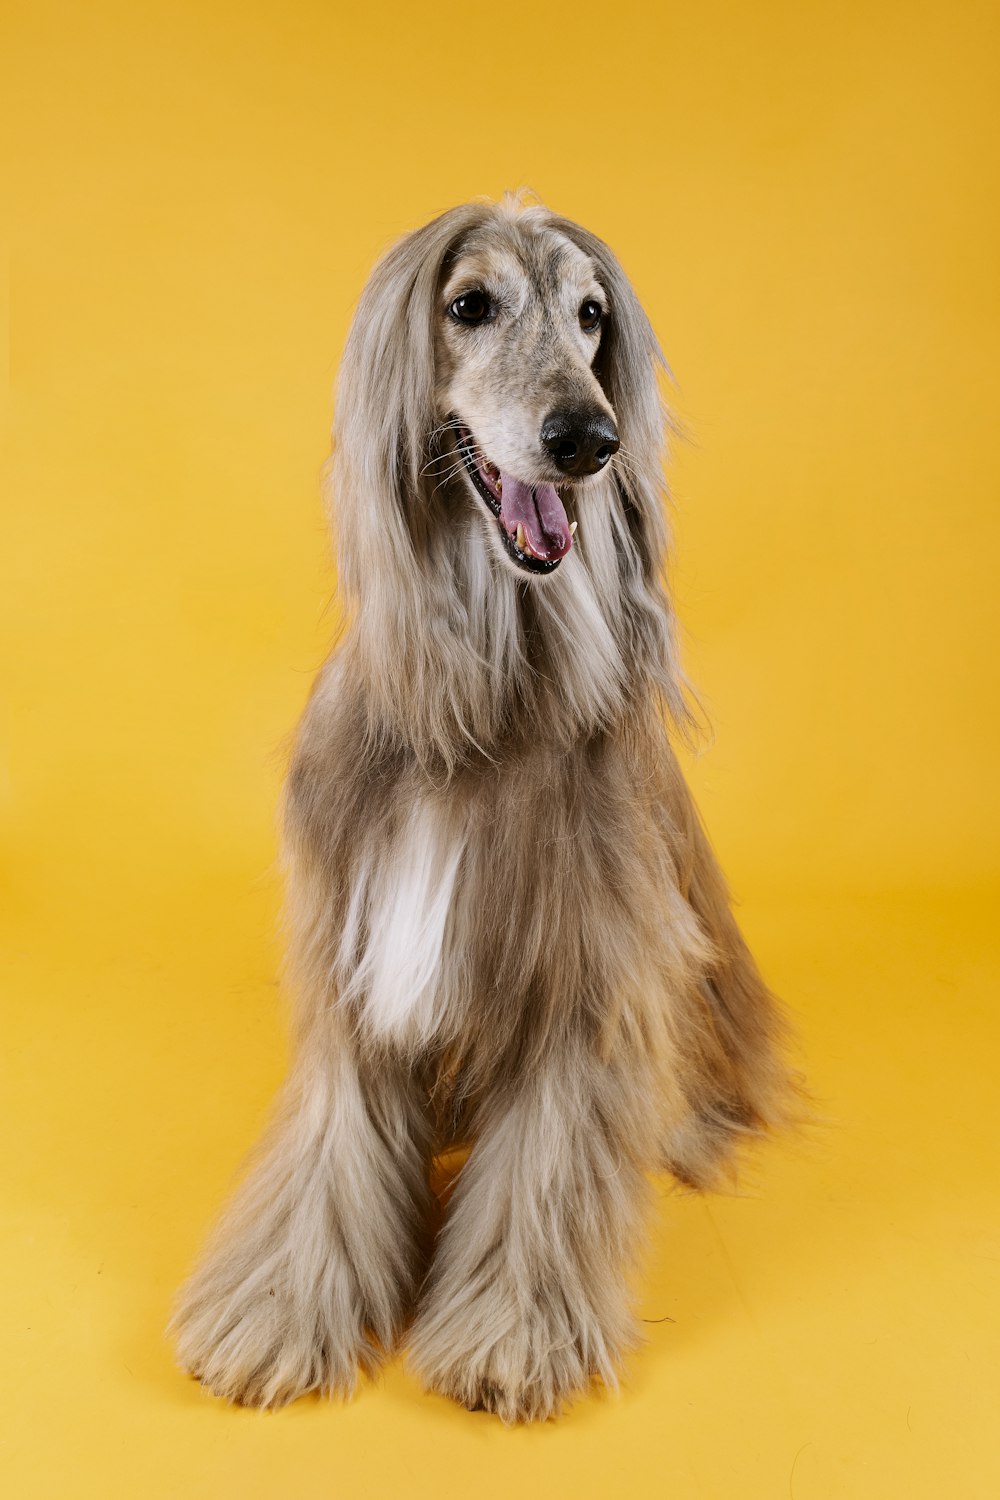 brown and white long coated dog